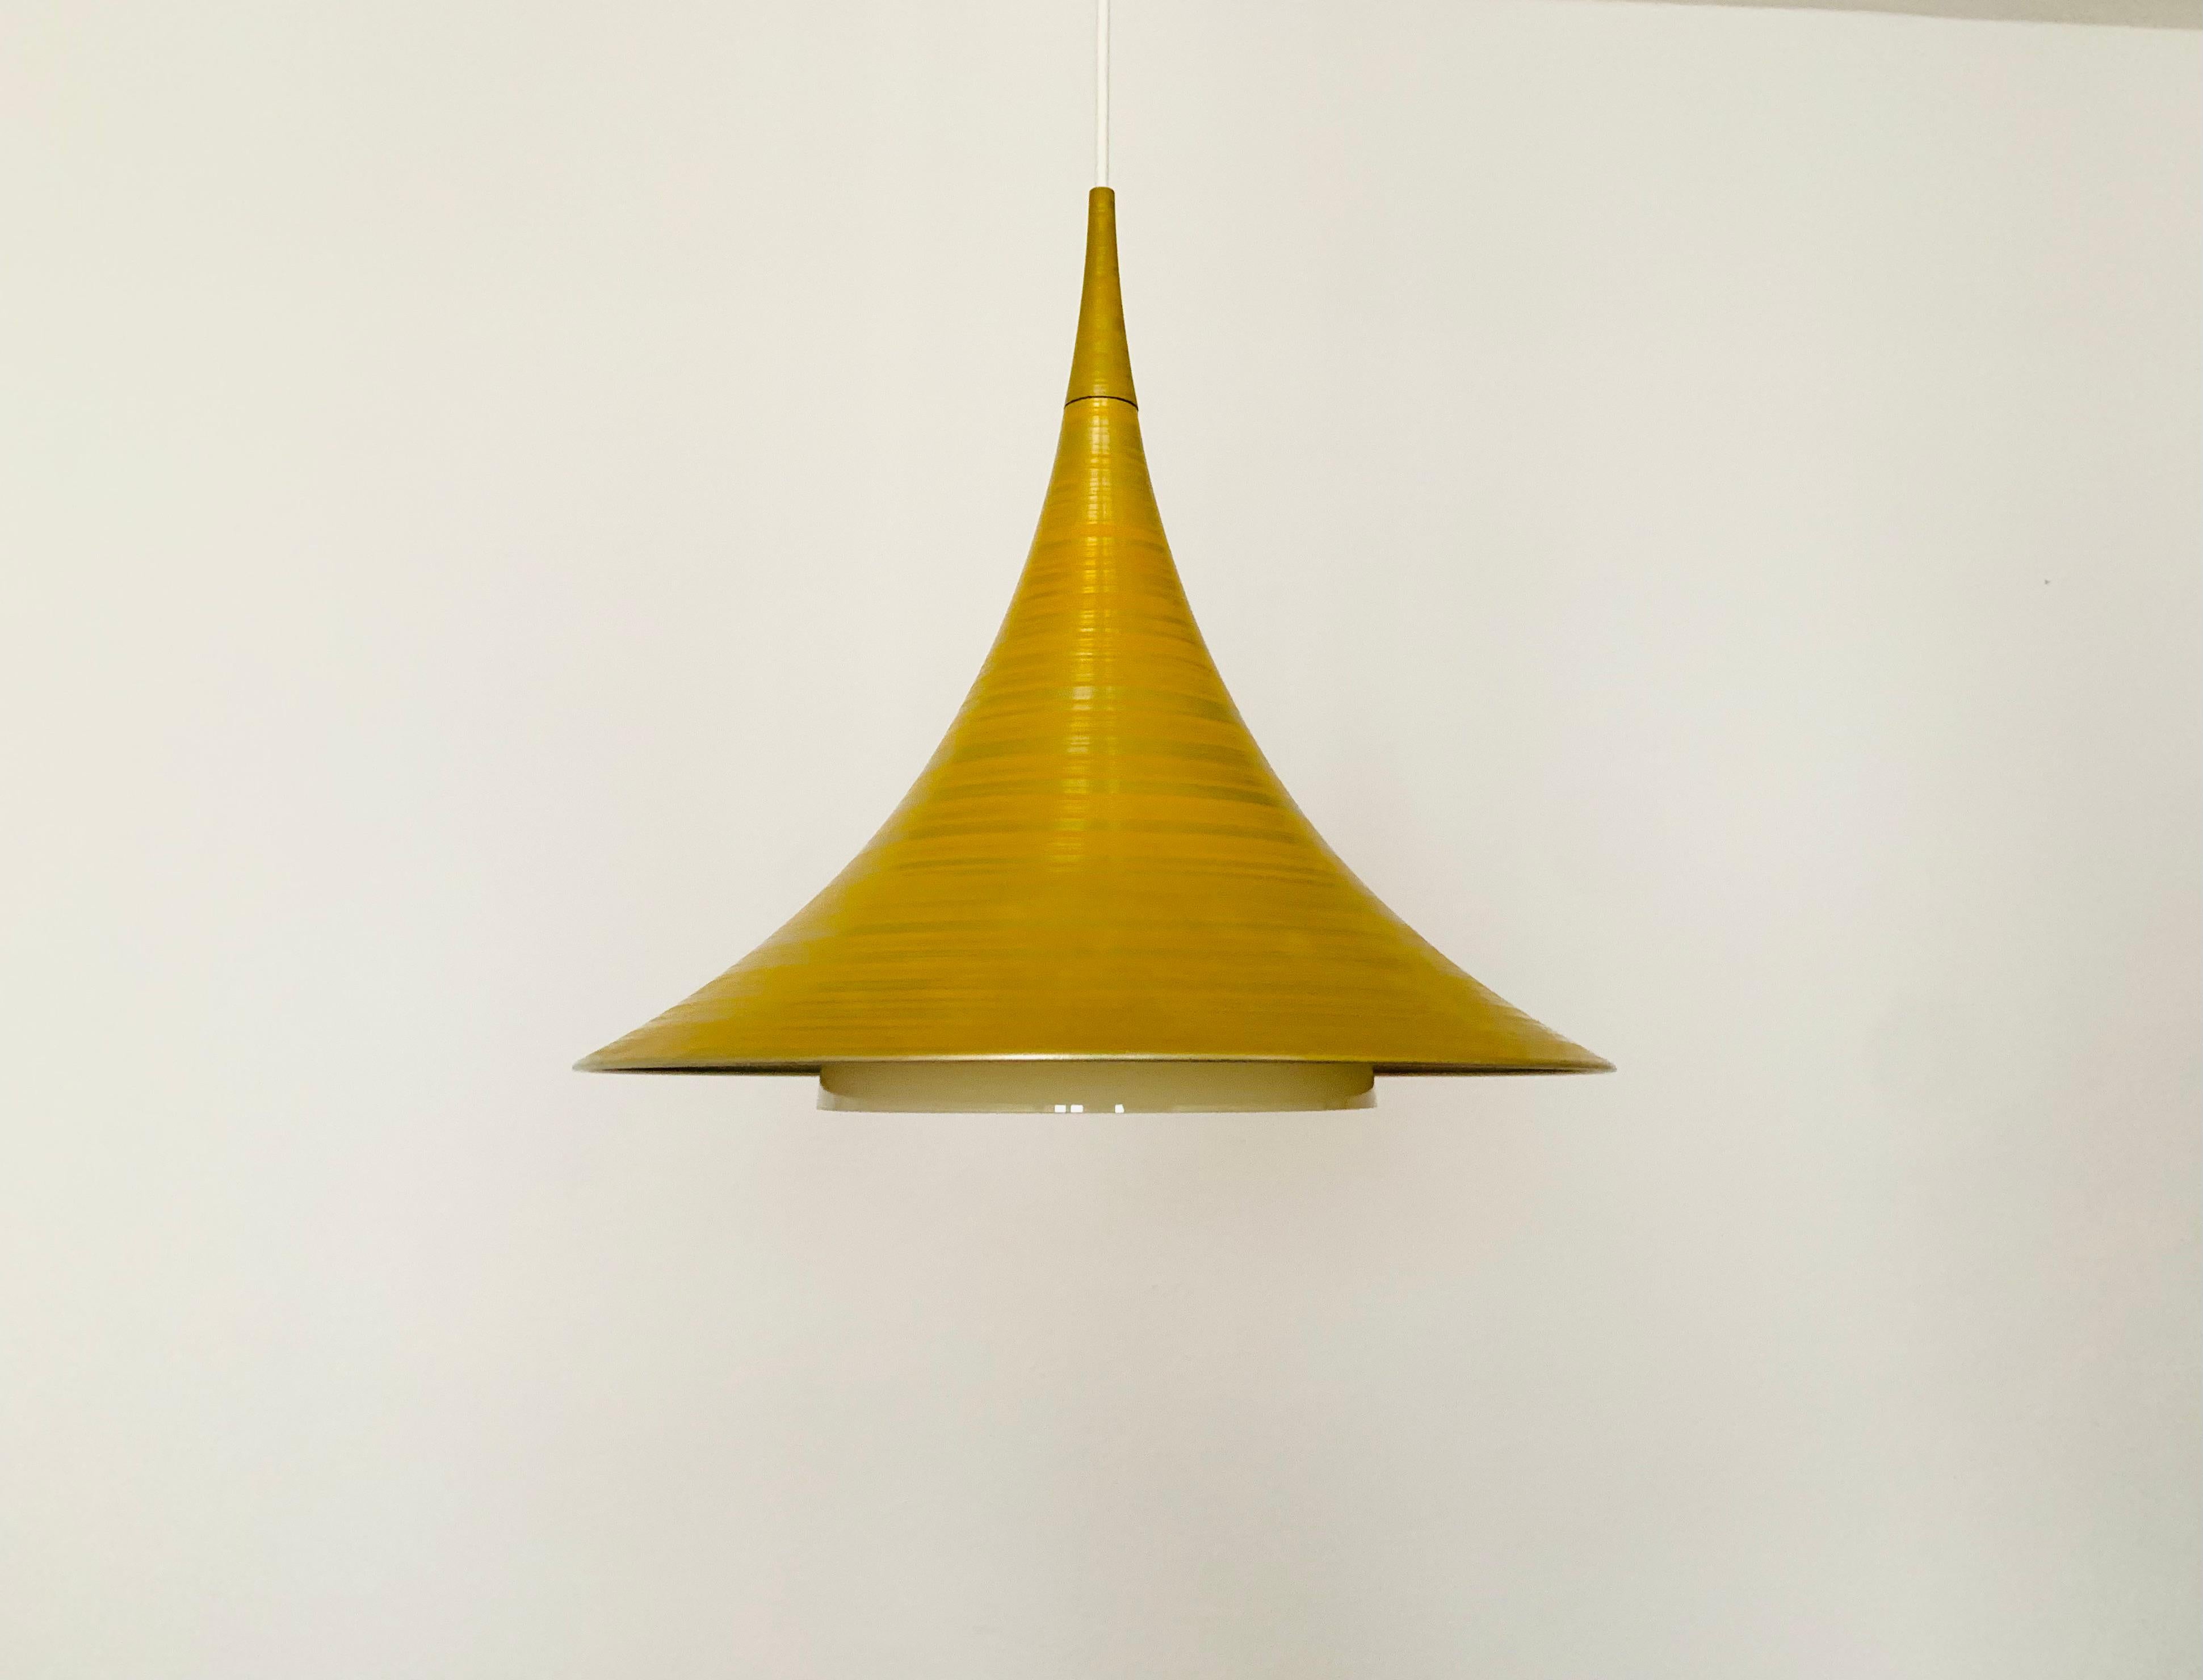 Very nice pendant lamp from the 1960s.
The design and the appearance of the lamp is particularly beautiful.
The shape creates a warm and pleasant light.
An absolute design classic and an enrichment for every home.

Condition:

Very good vintage